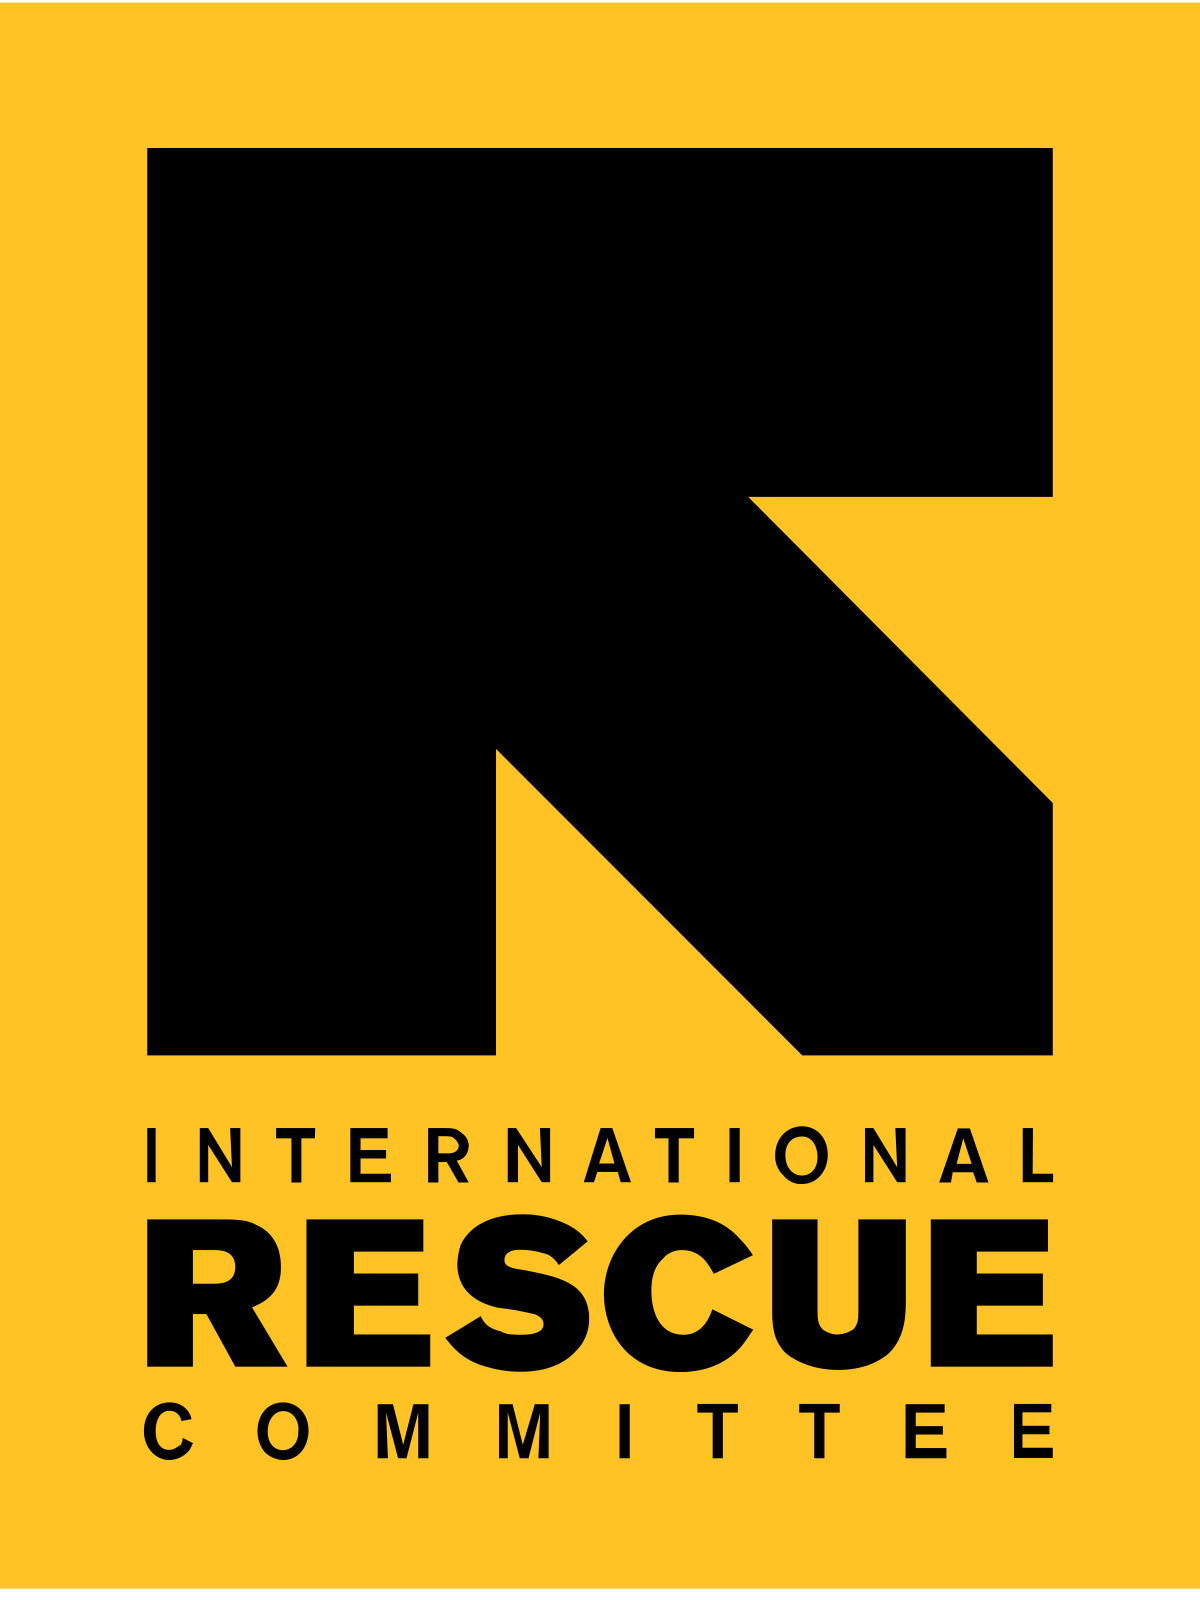 The International Rescue Committee (IRC)